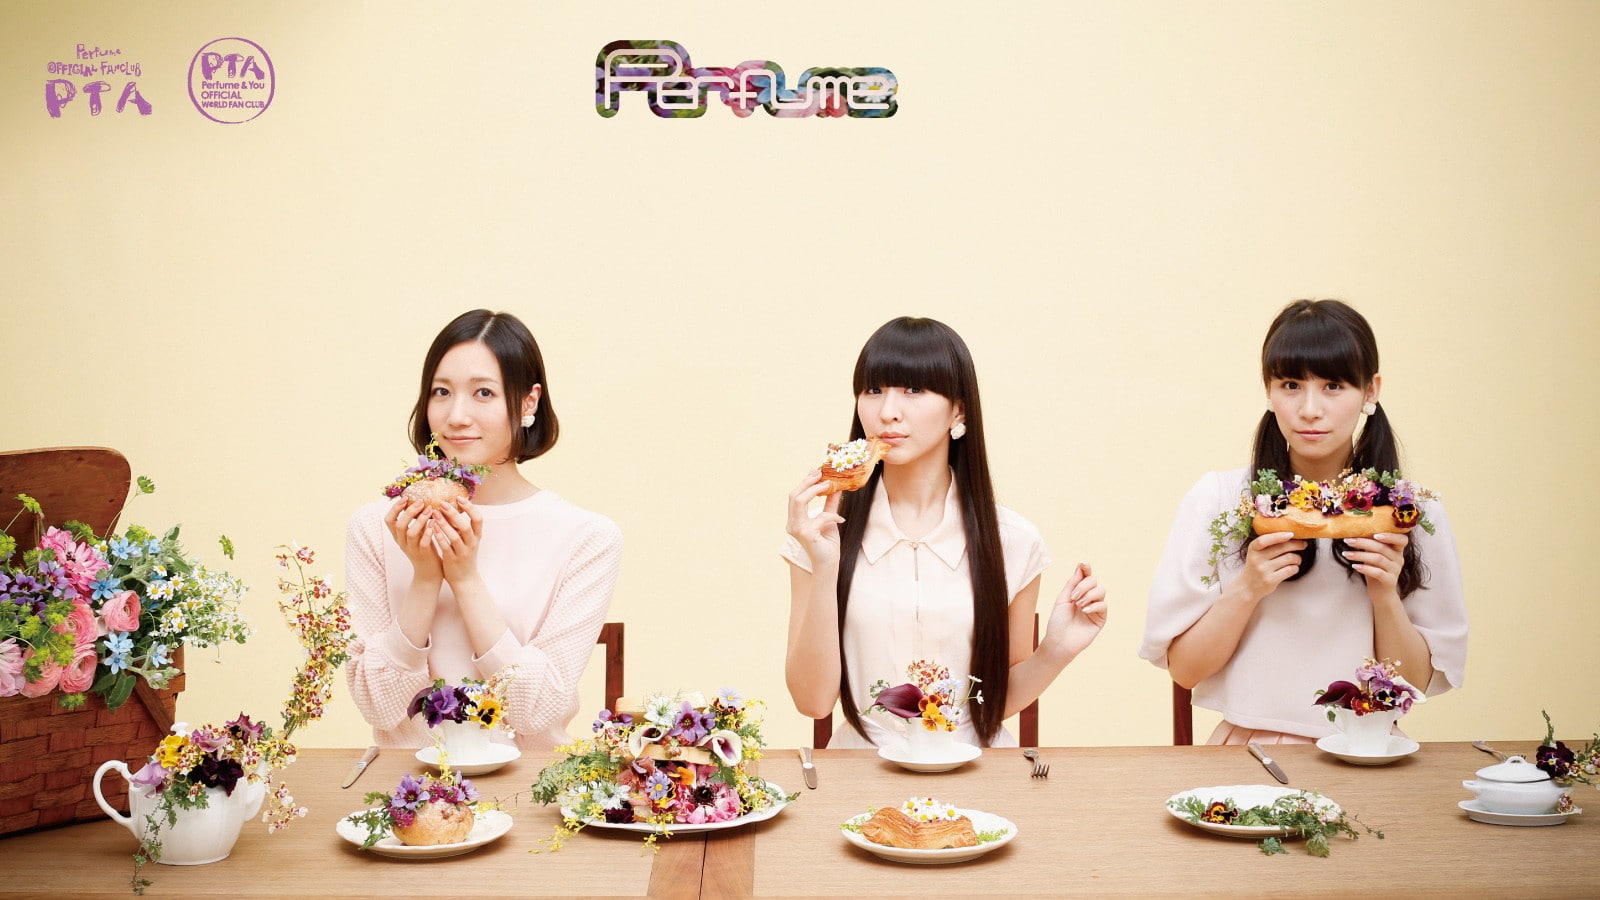 perfume women asian perfume band j pop flowers sandwiches, group of people